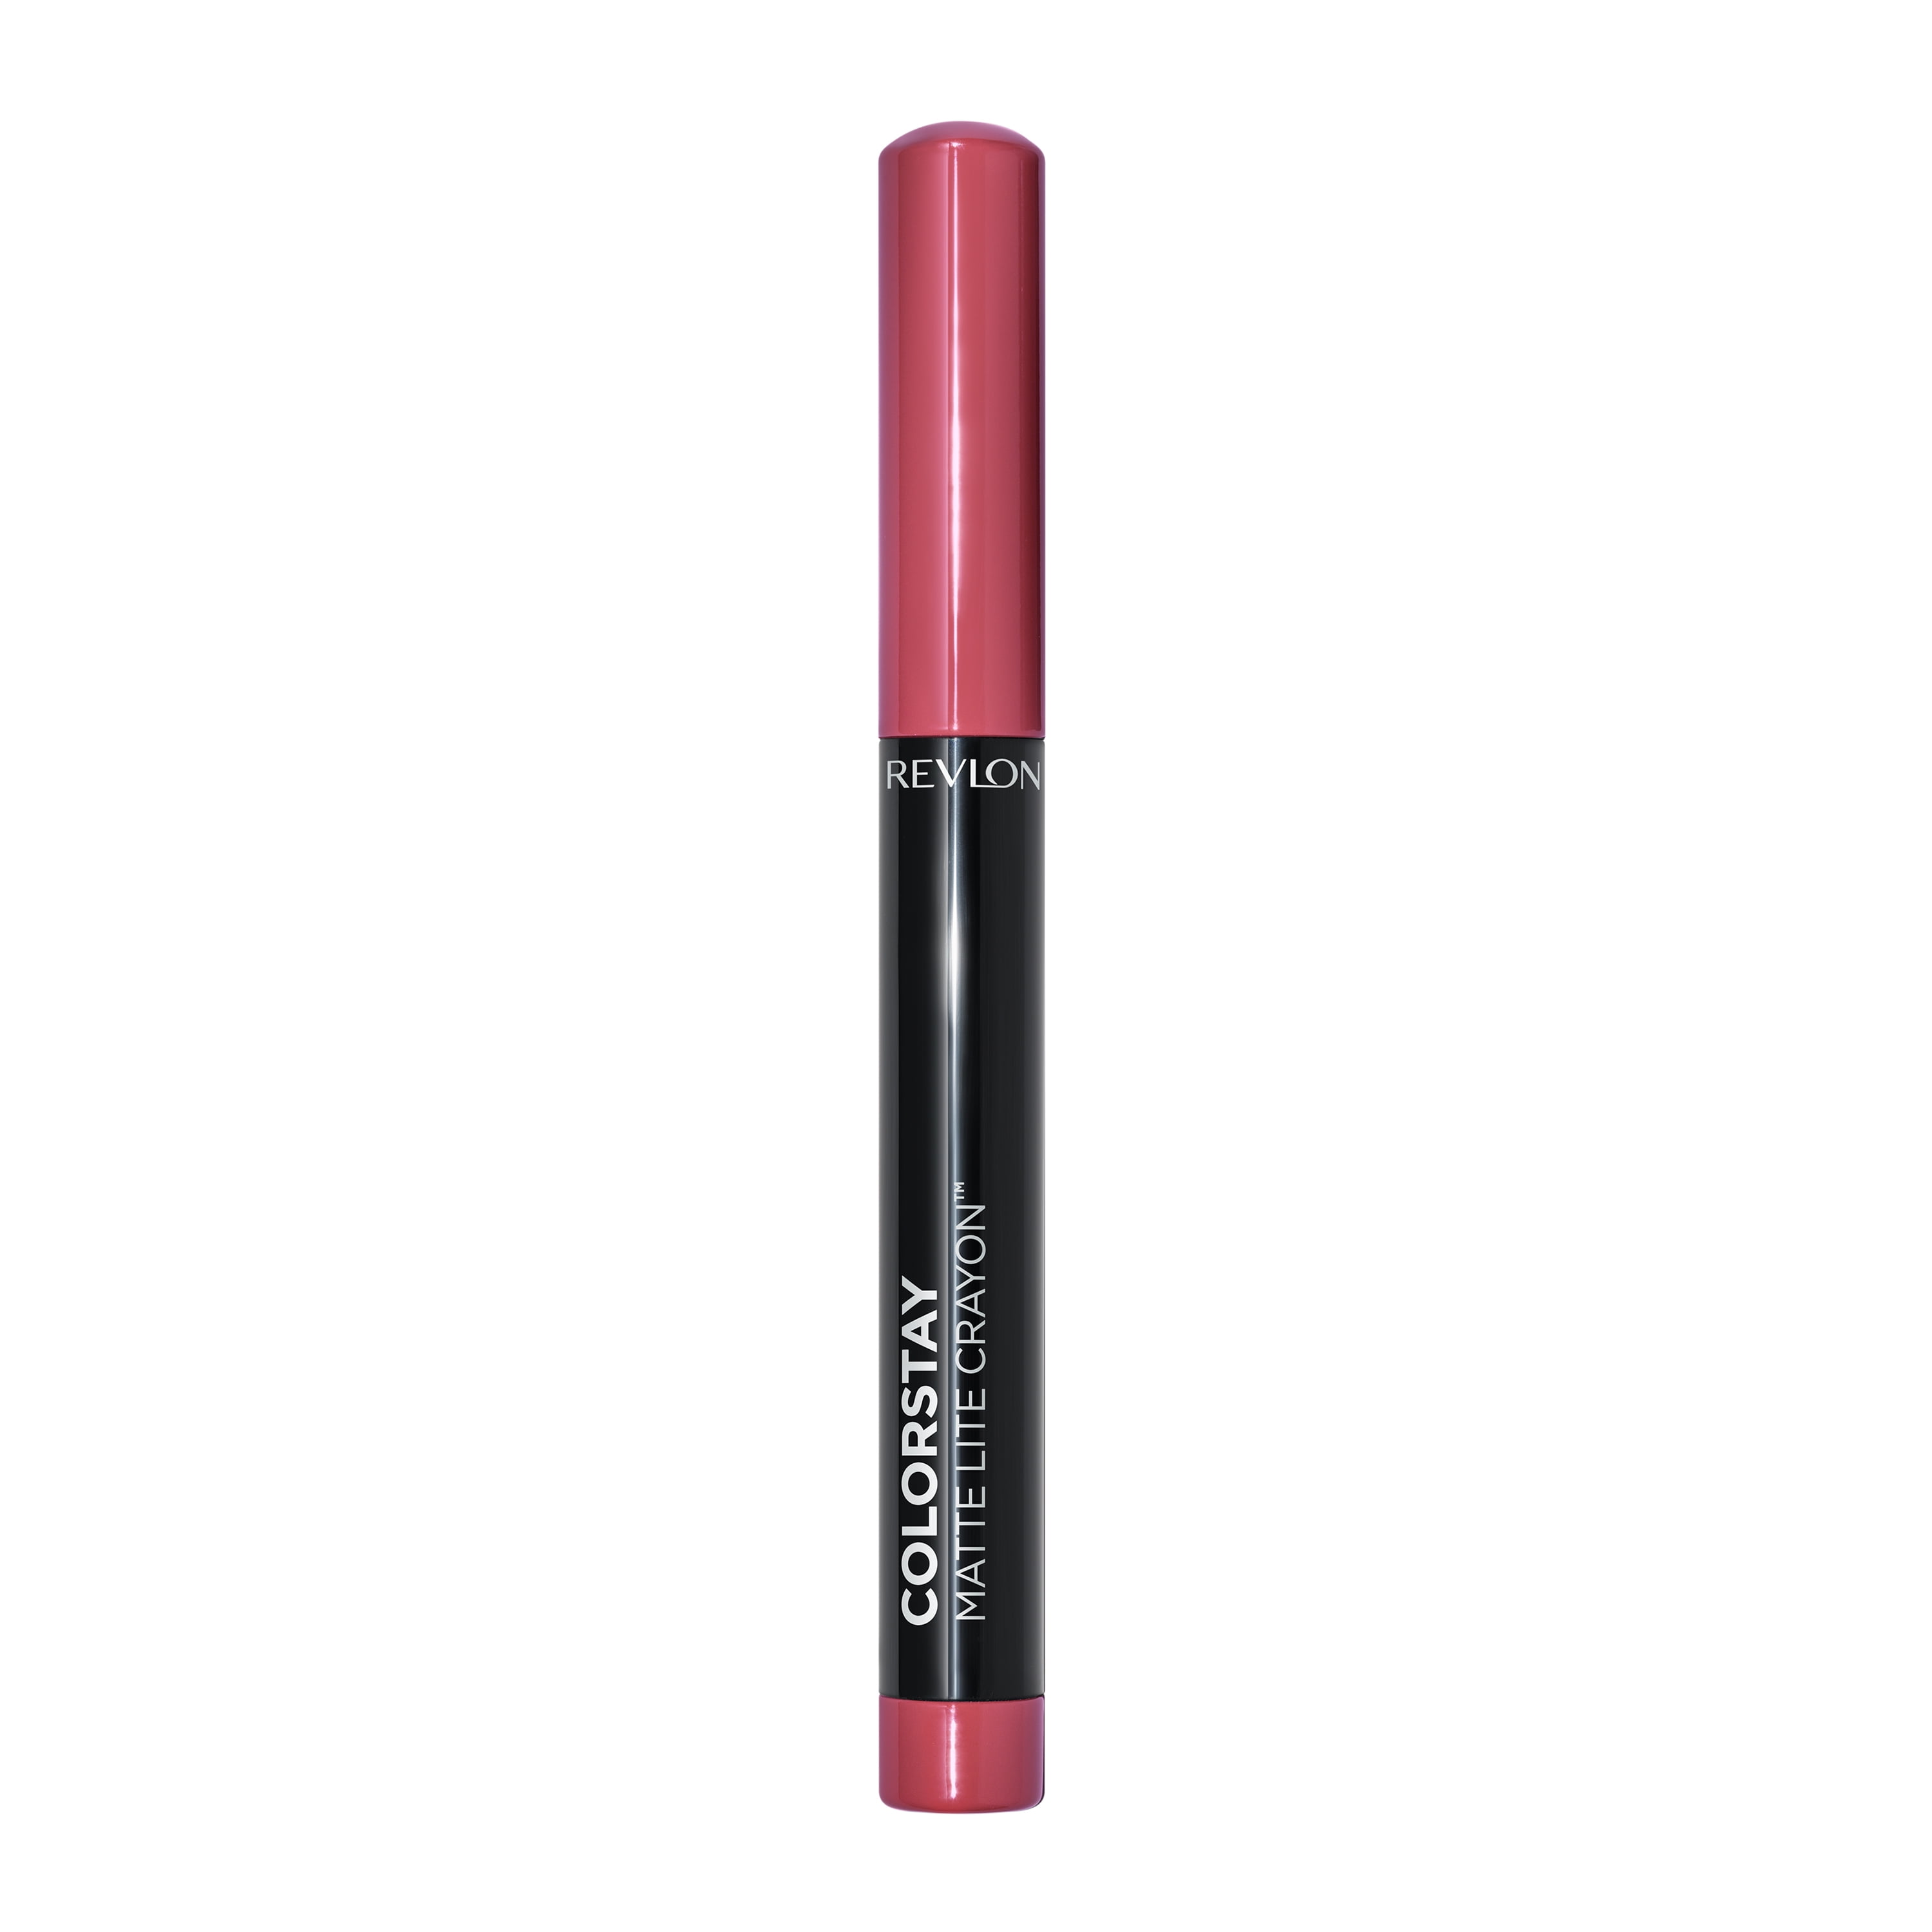 Revlon ColorStay Matte Lite Crayon Lipstick with Built-in Sharpener, Smudgeproof, Water-Resistant Non-Drying Lipcolor, 004 Take Flight, 0.049 oz